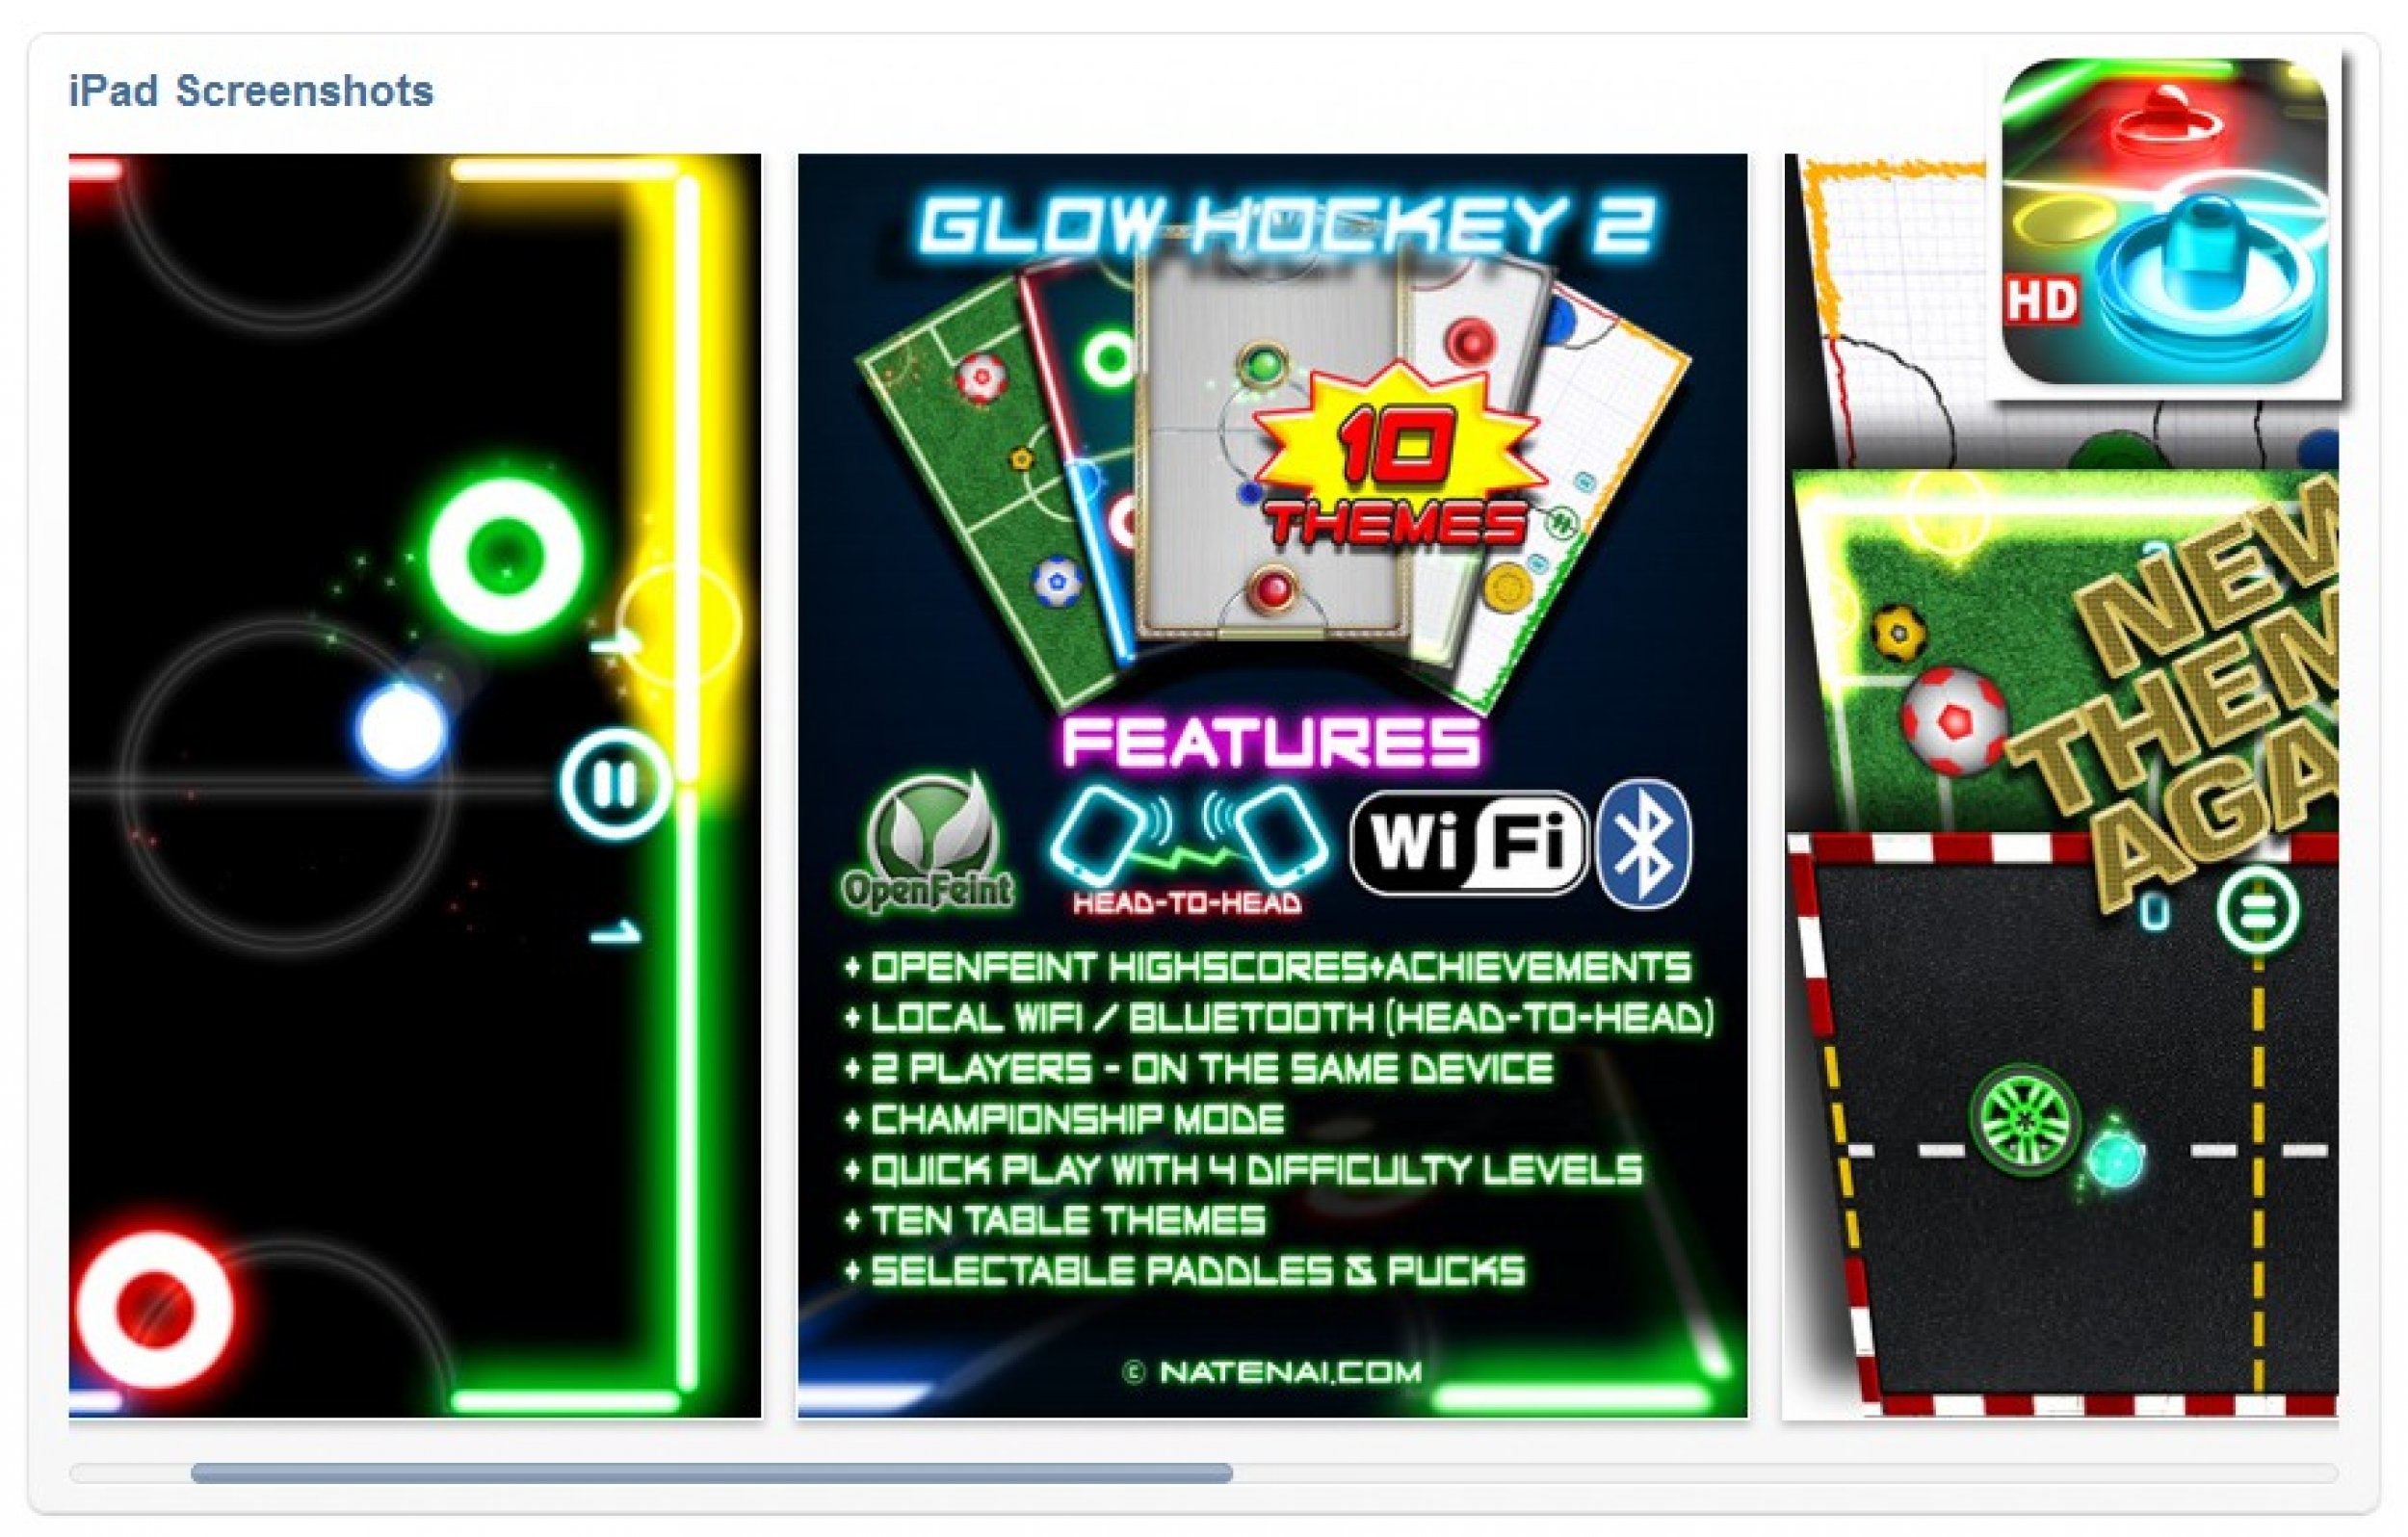 Glow Hockey 2 HD Game - Top 50 must-have iPad apps